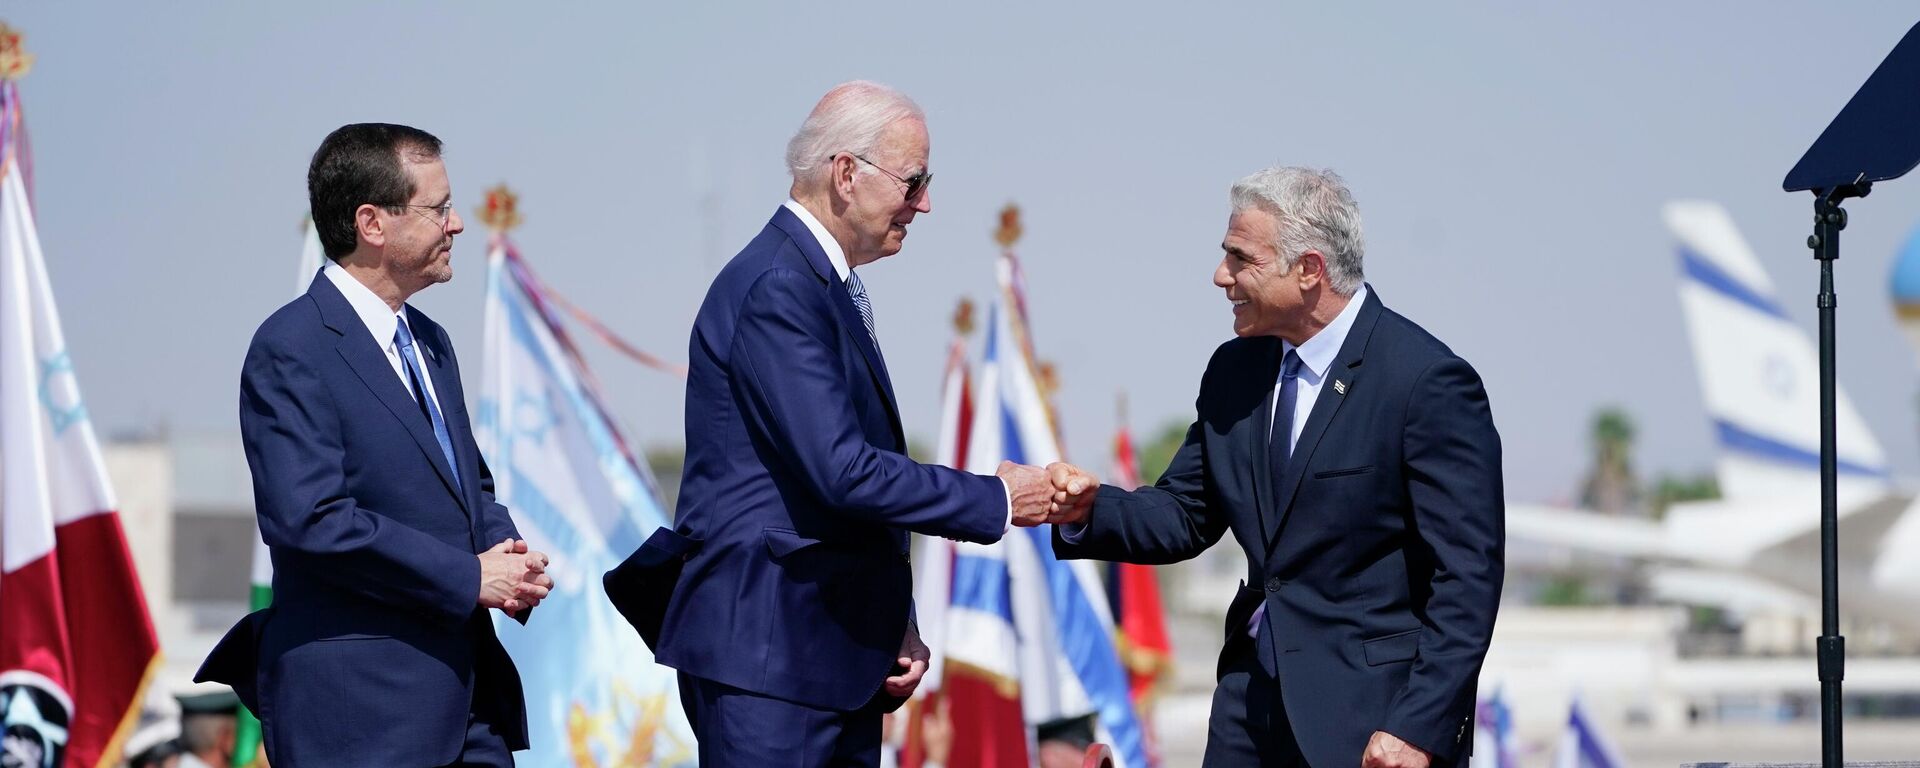 President Joe Biden is greeted by Israeli Prime Minister Yair Lapid, right and President Isaac Herzog, left, as they participate in an arrival ceremony after Biden arrived at Ben Gurion Airport, Wednesday, July 13, 2022, in Tel Aviv.  - Sputnik International, 1920, 08.08.2022